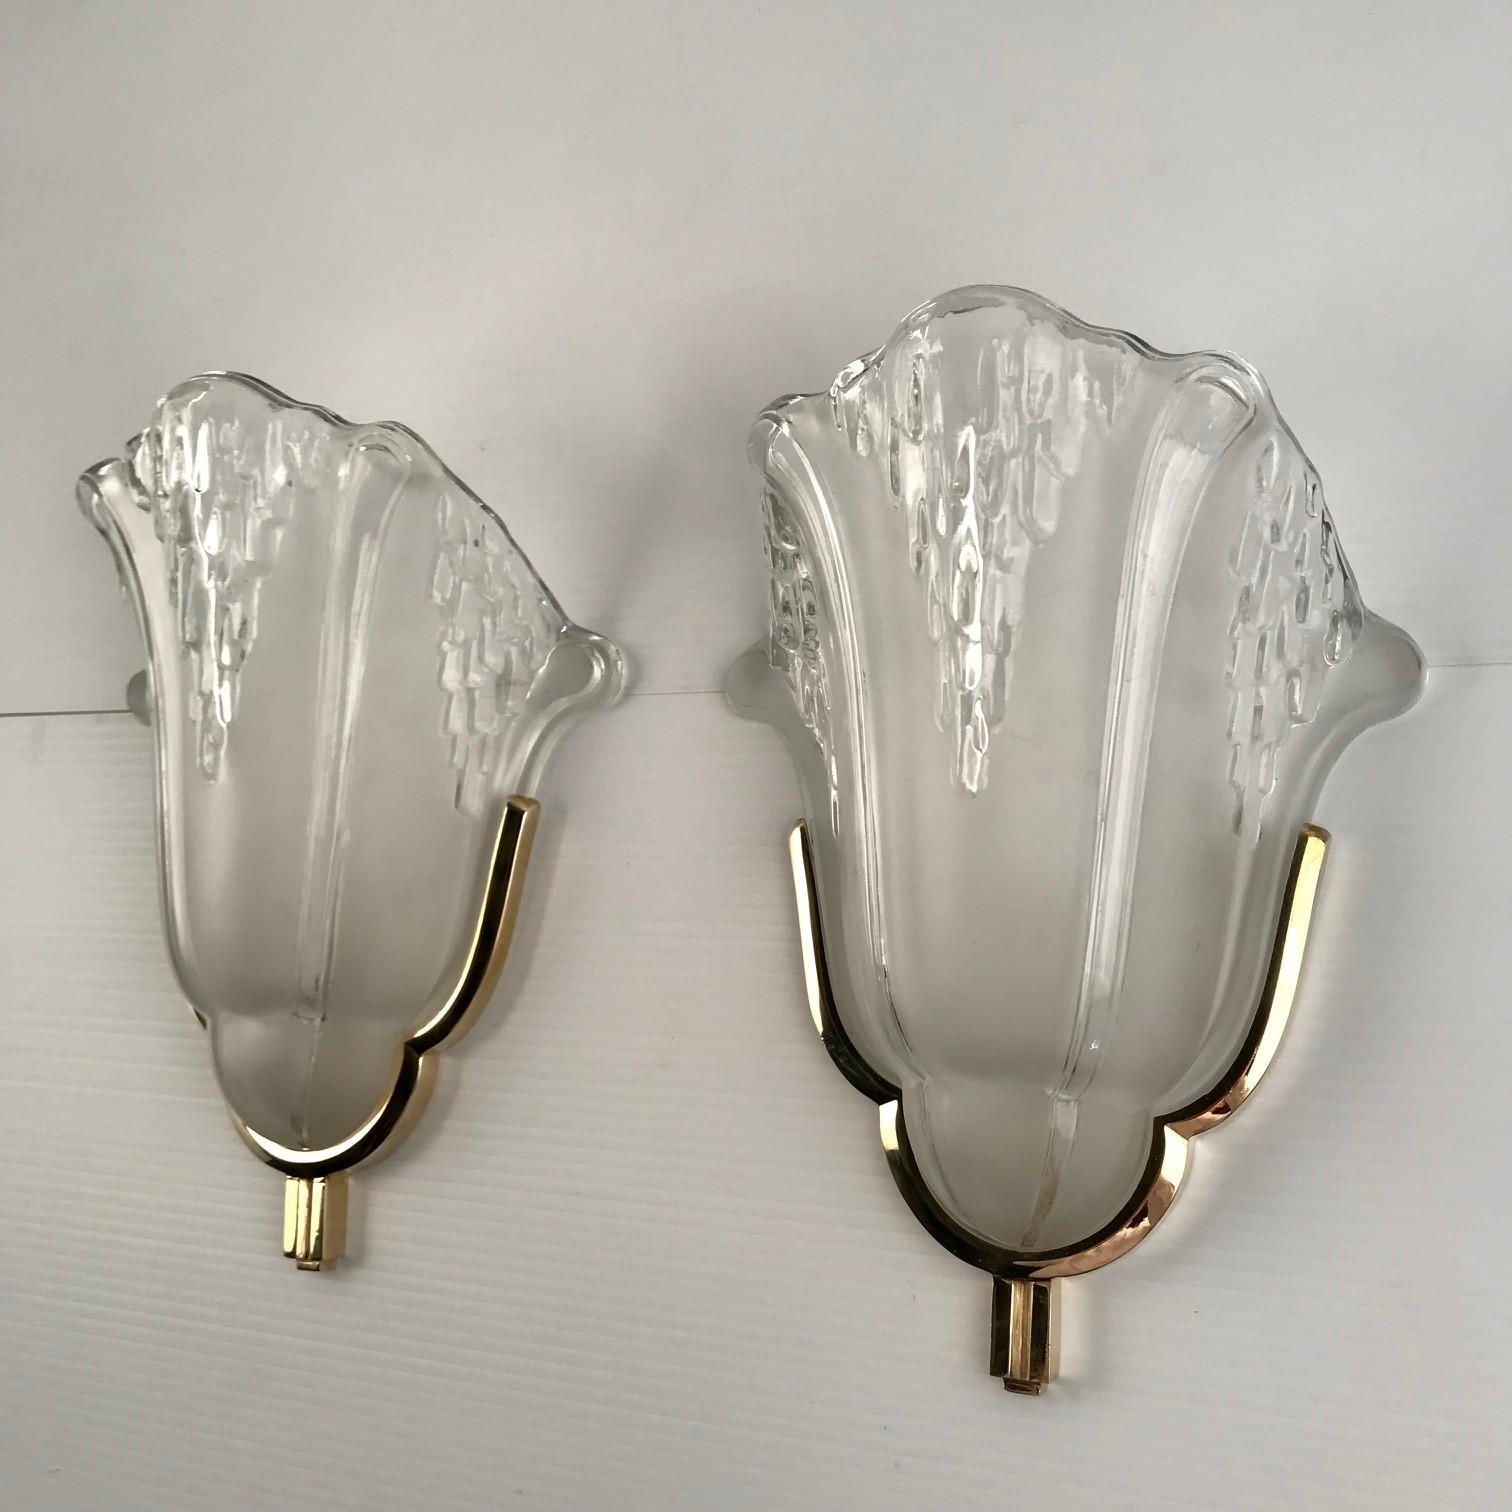  French Art Deco Wall Sconces by Petitot, 1930 Set of Four For Sale 2